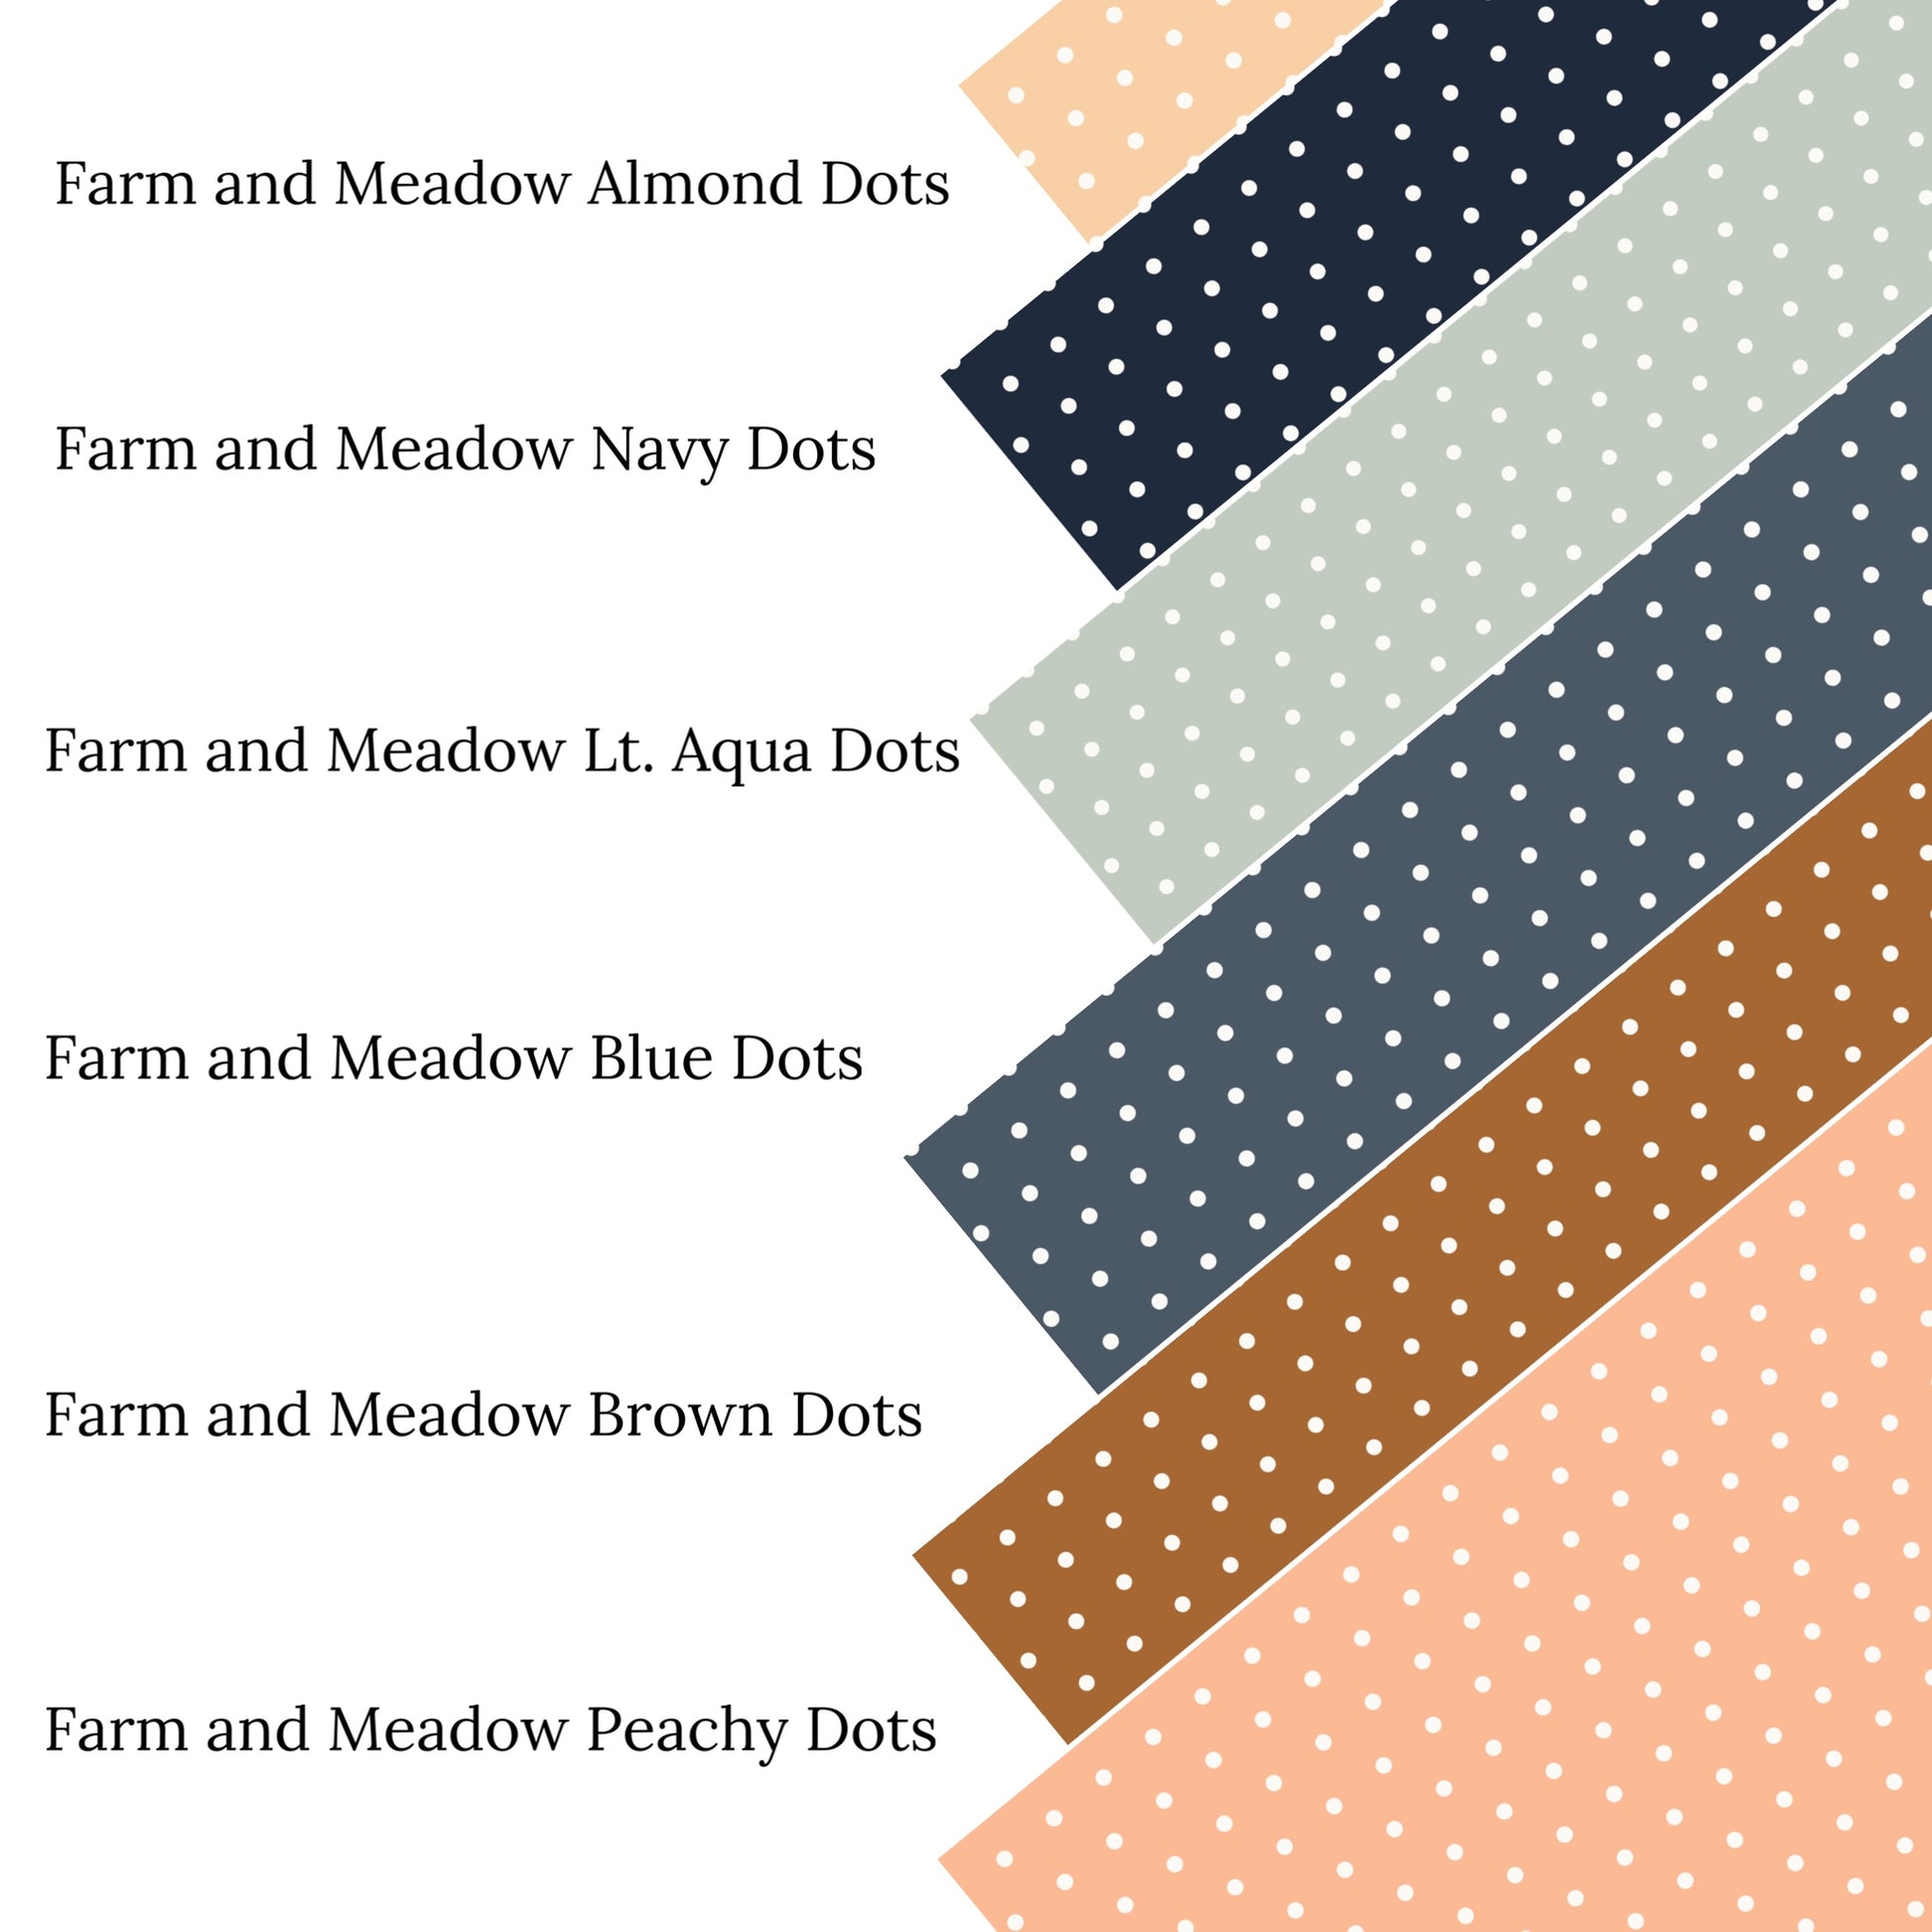 These spring and summer pattern fabric by the yard features farm and meadow polka dot patterns. This fun fabric can be used for all your sewing and crafting needs!